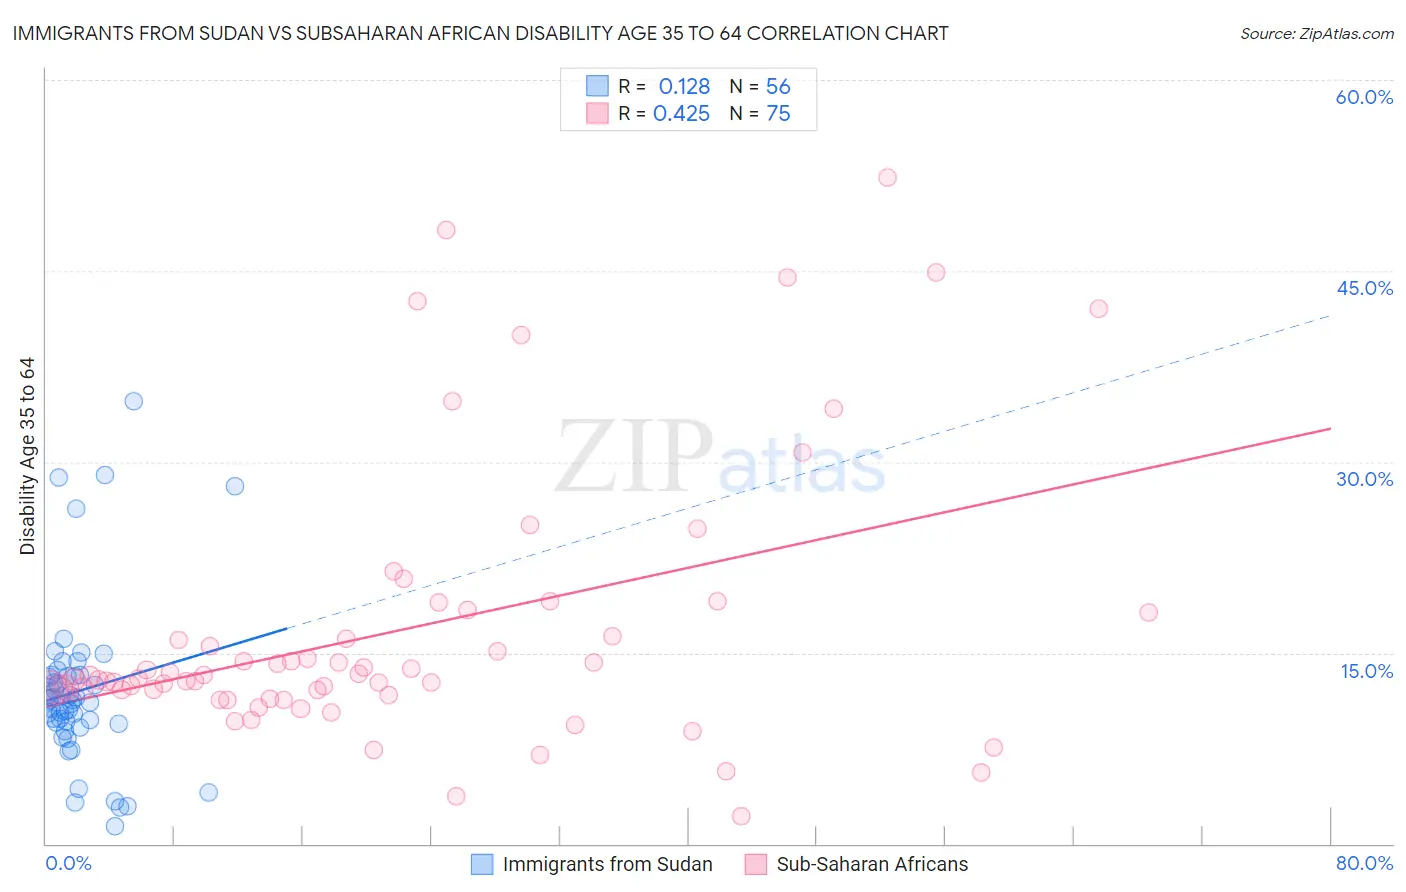 Immigrants from Sudan vs Subsaharan African Disability Age 35 to 64